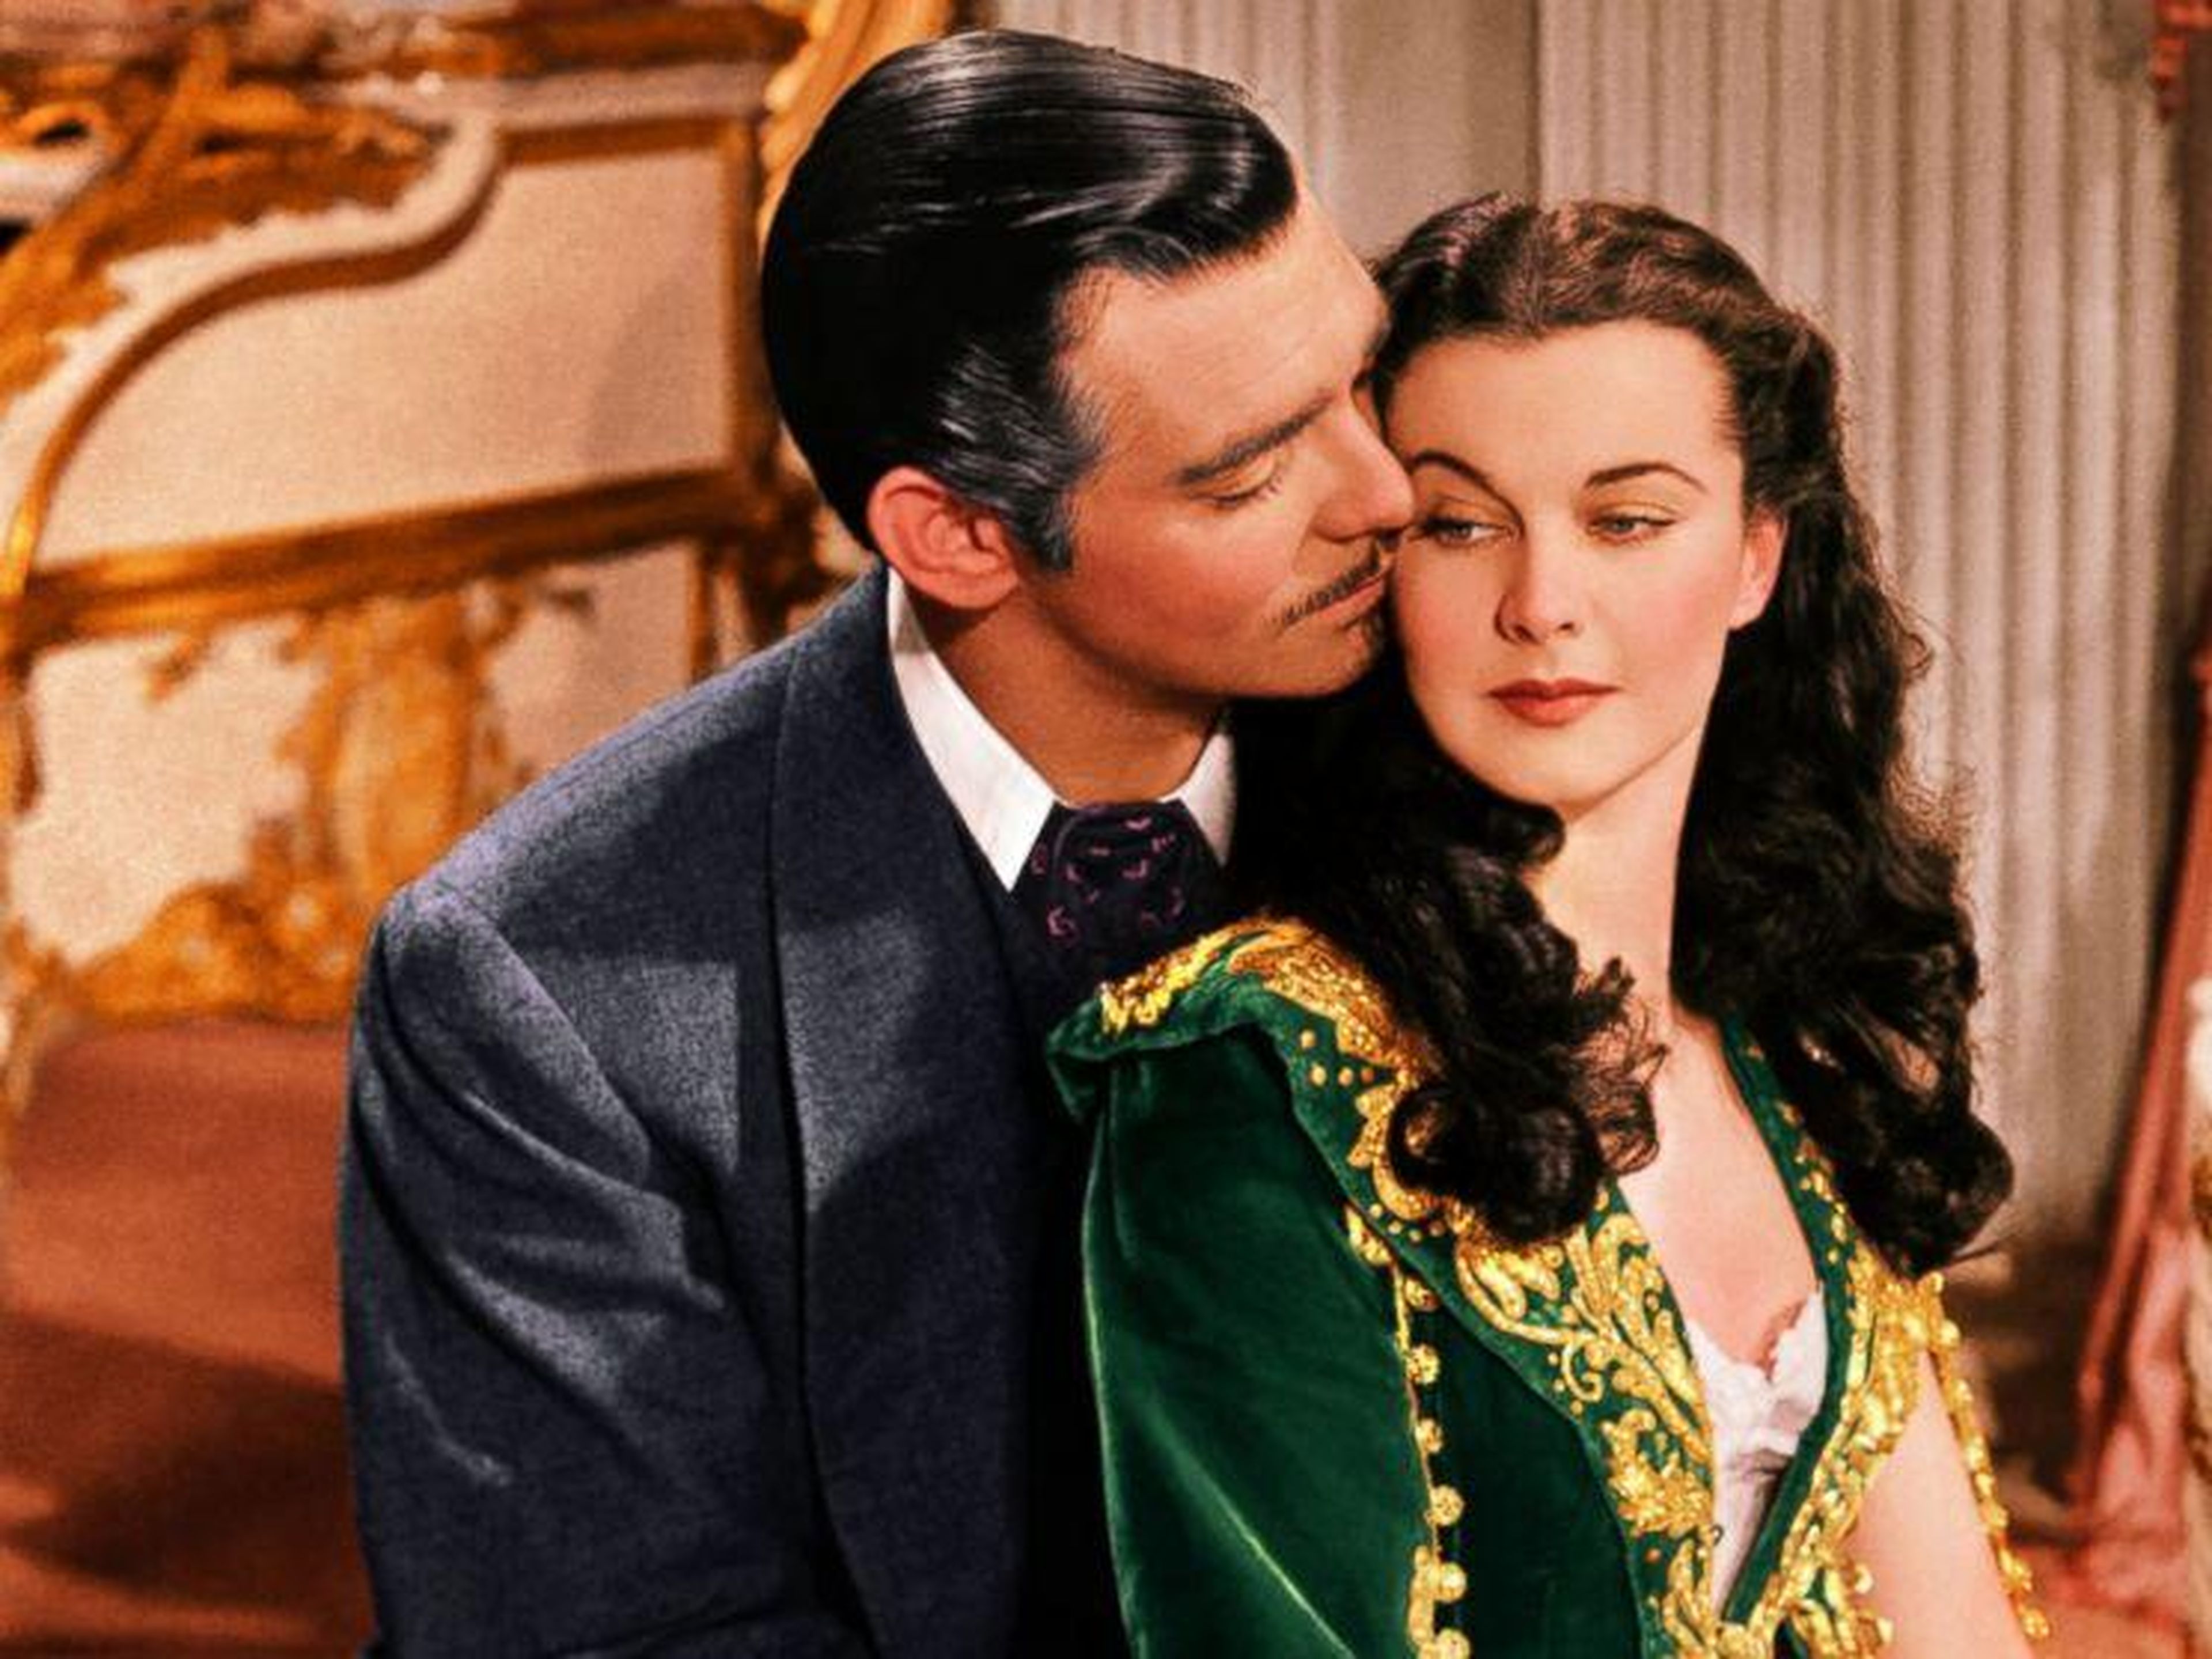 "Gone with the Wind" (1939) has been called out for its portrayal of slavery.